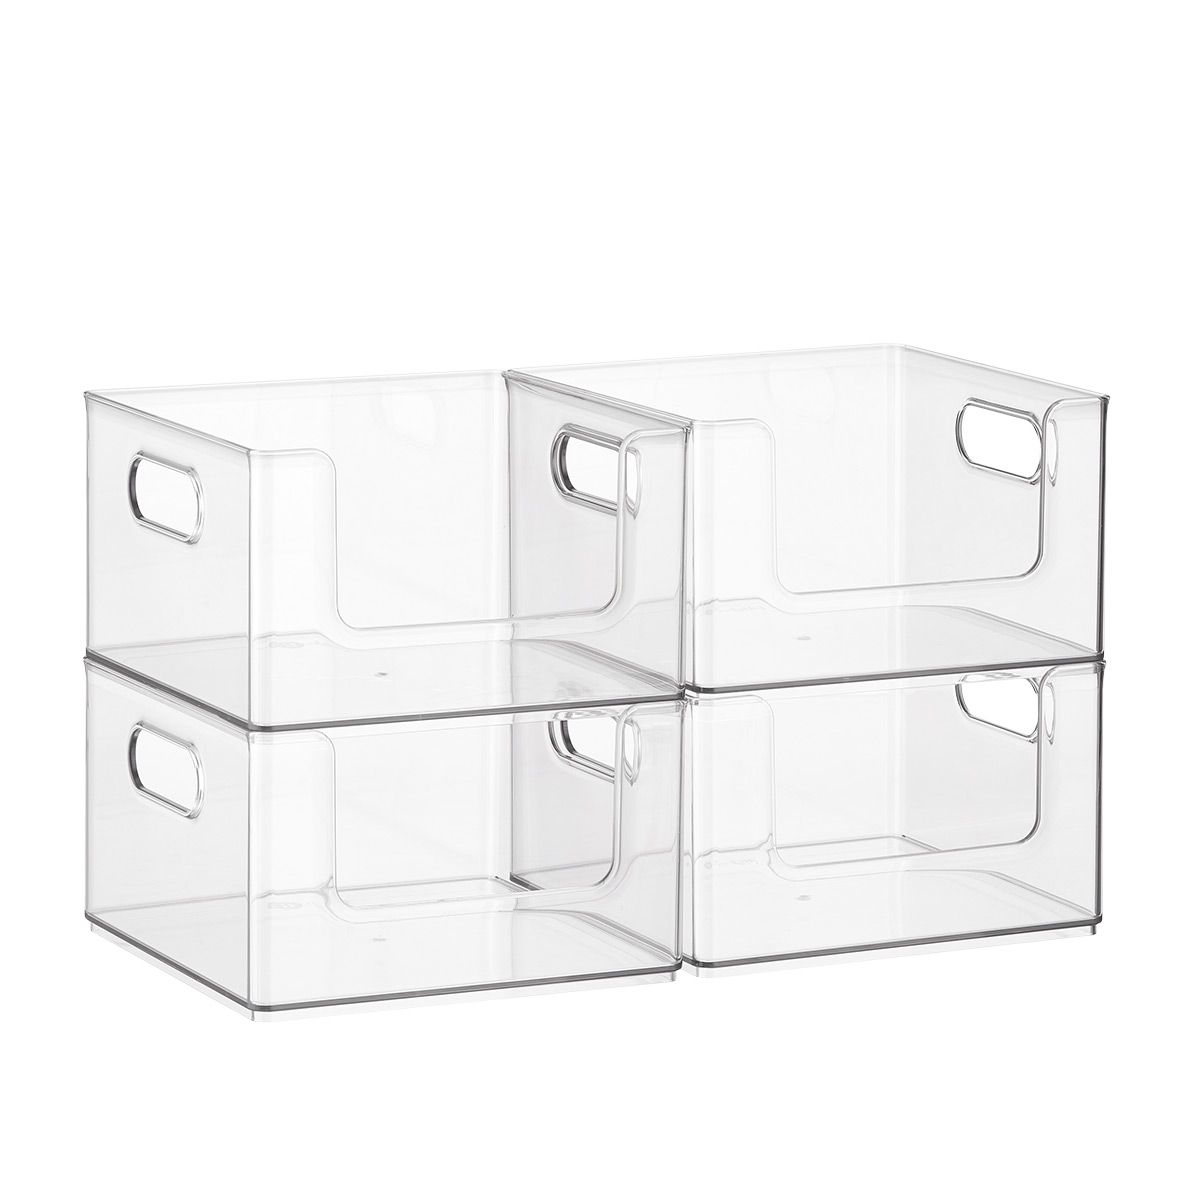 Case of 4 T.H.E. Stacking Pantry Bin | The Container Store